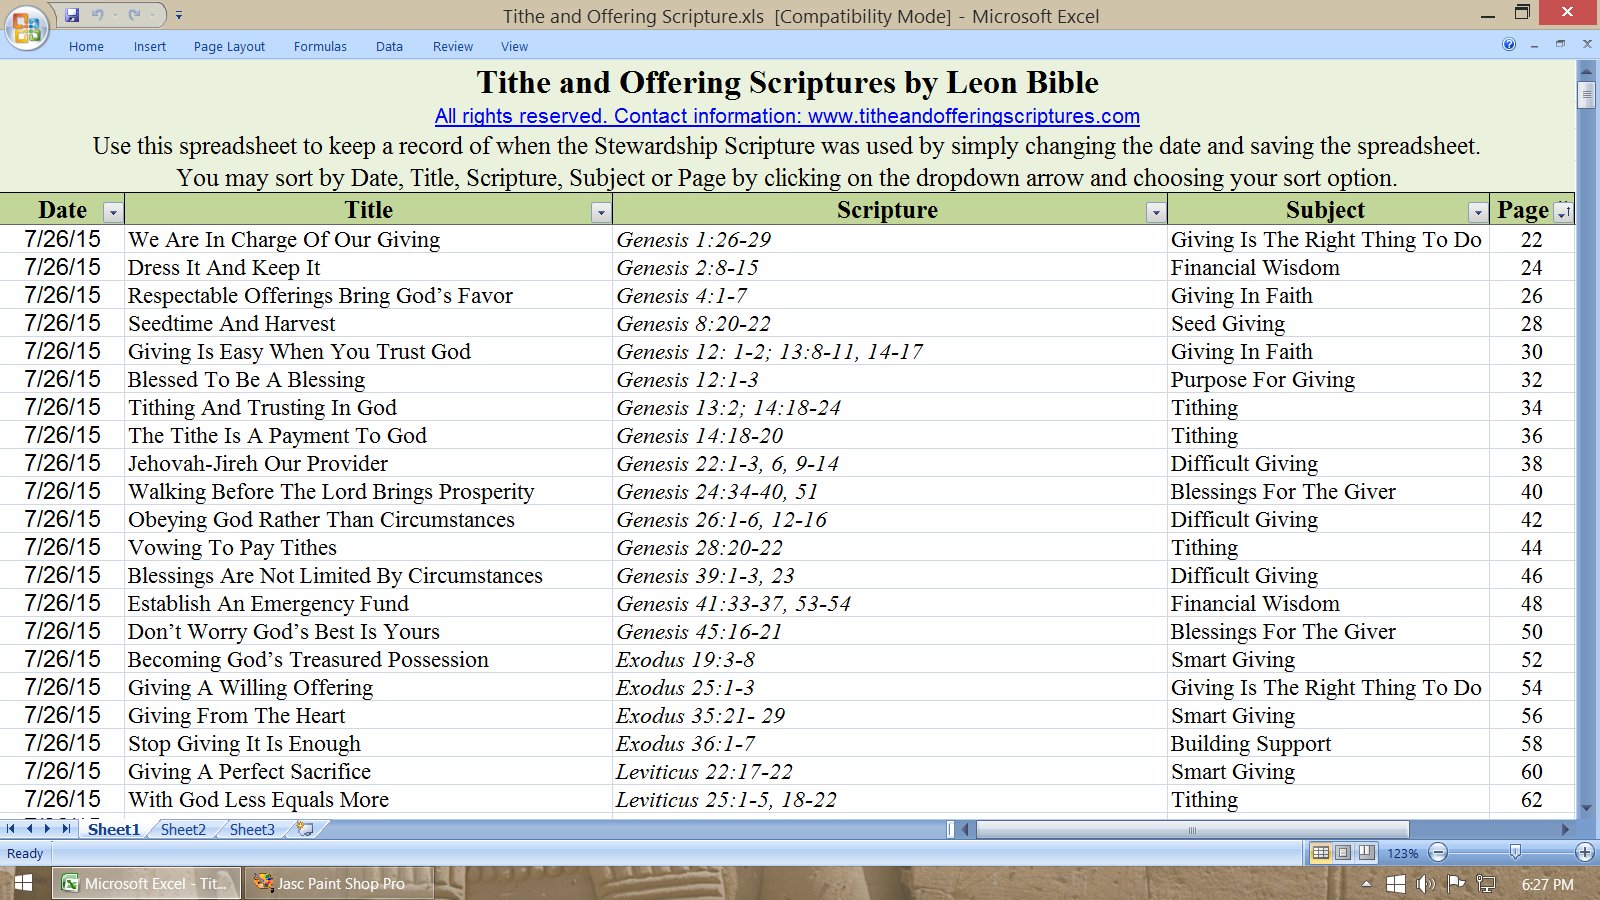 Tithe and Offering Scriptures the Complete Collection